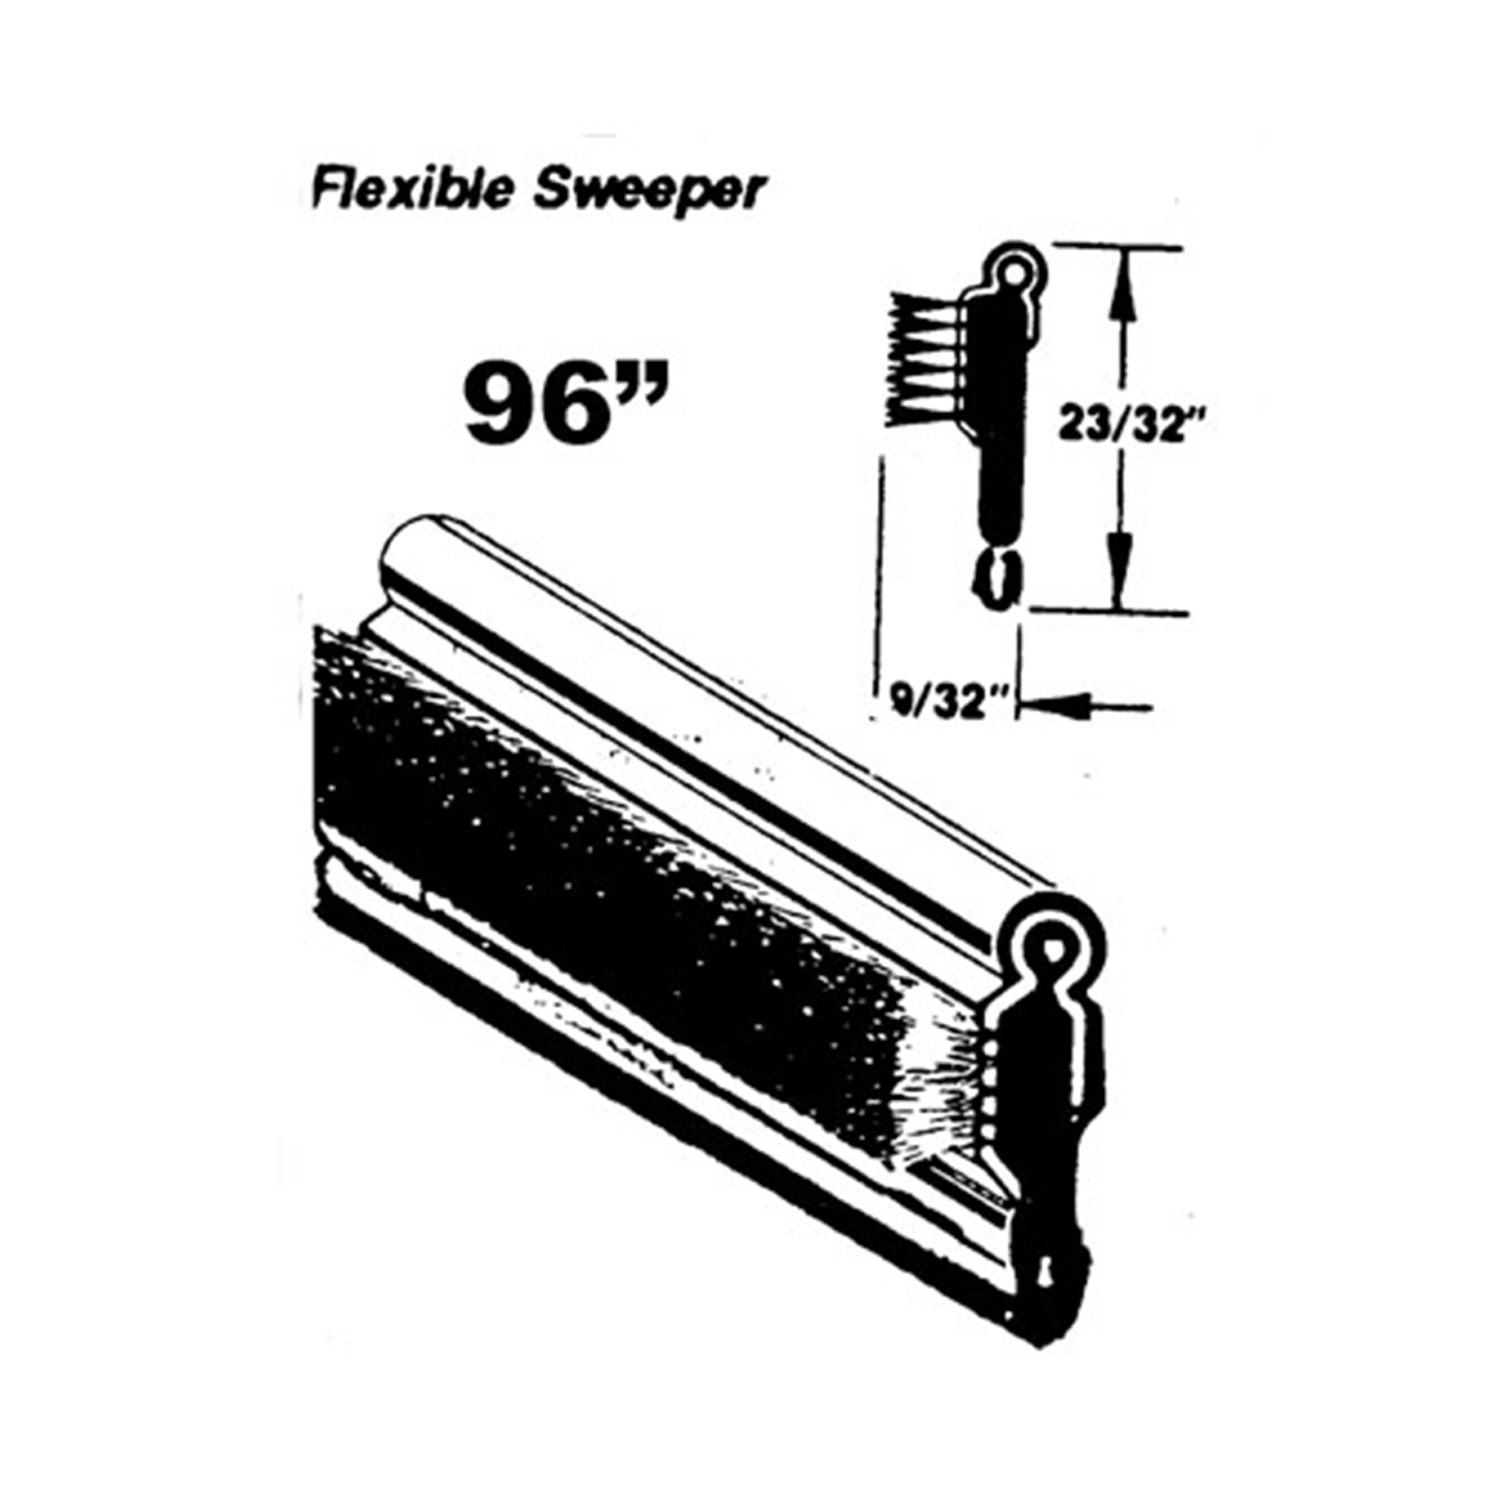 1954 Dodge Coronet Flexible window sweeper. Made with stainless steel bead-WC 4-96